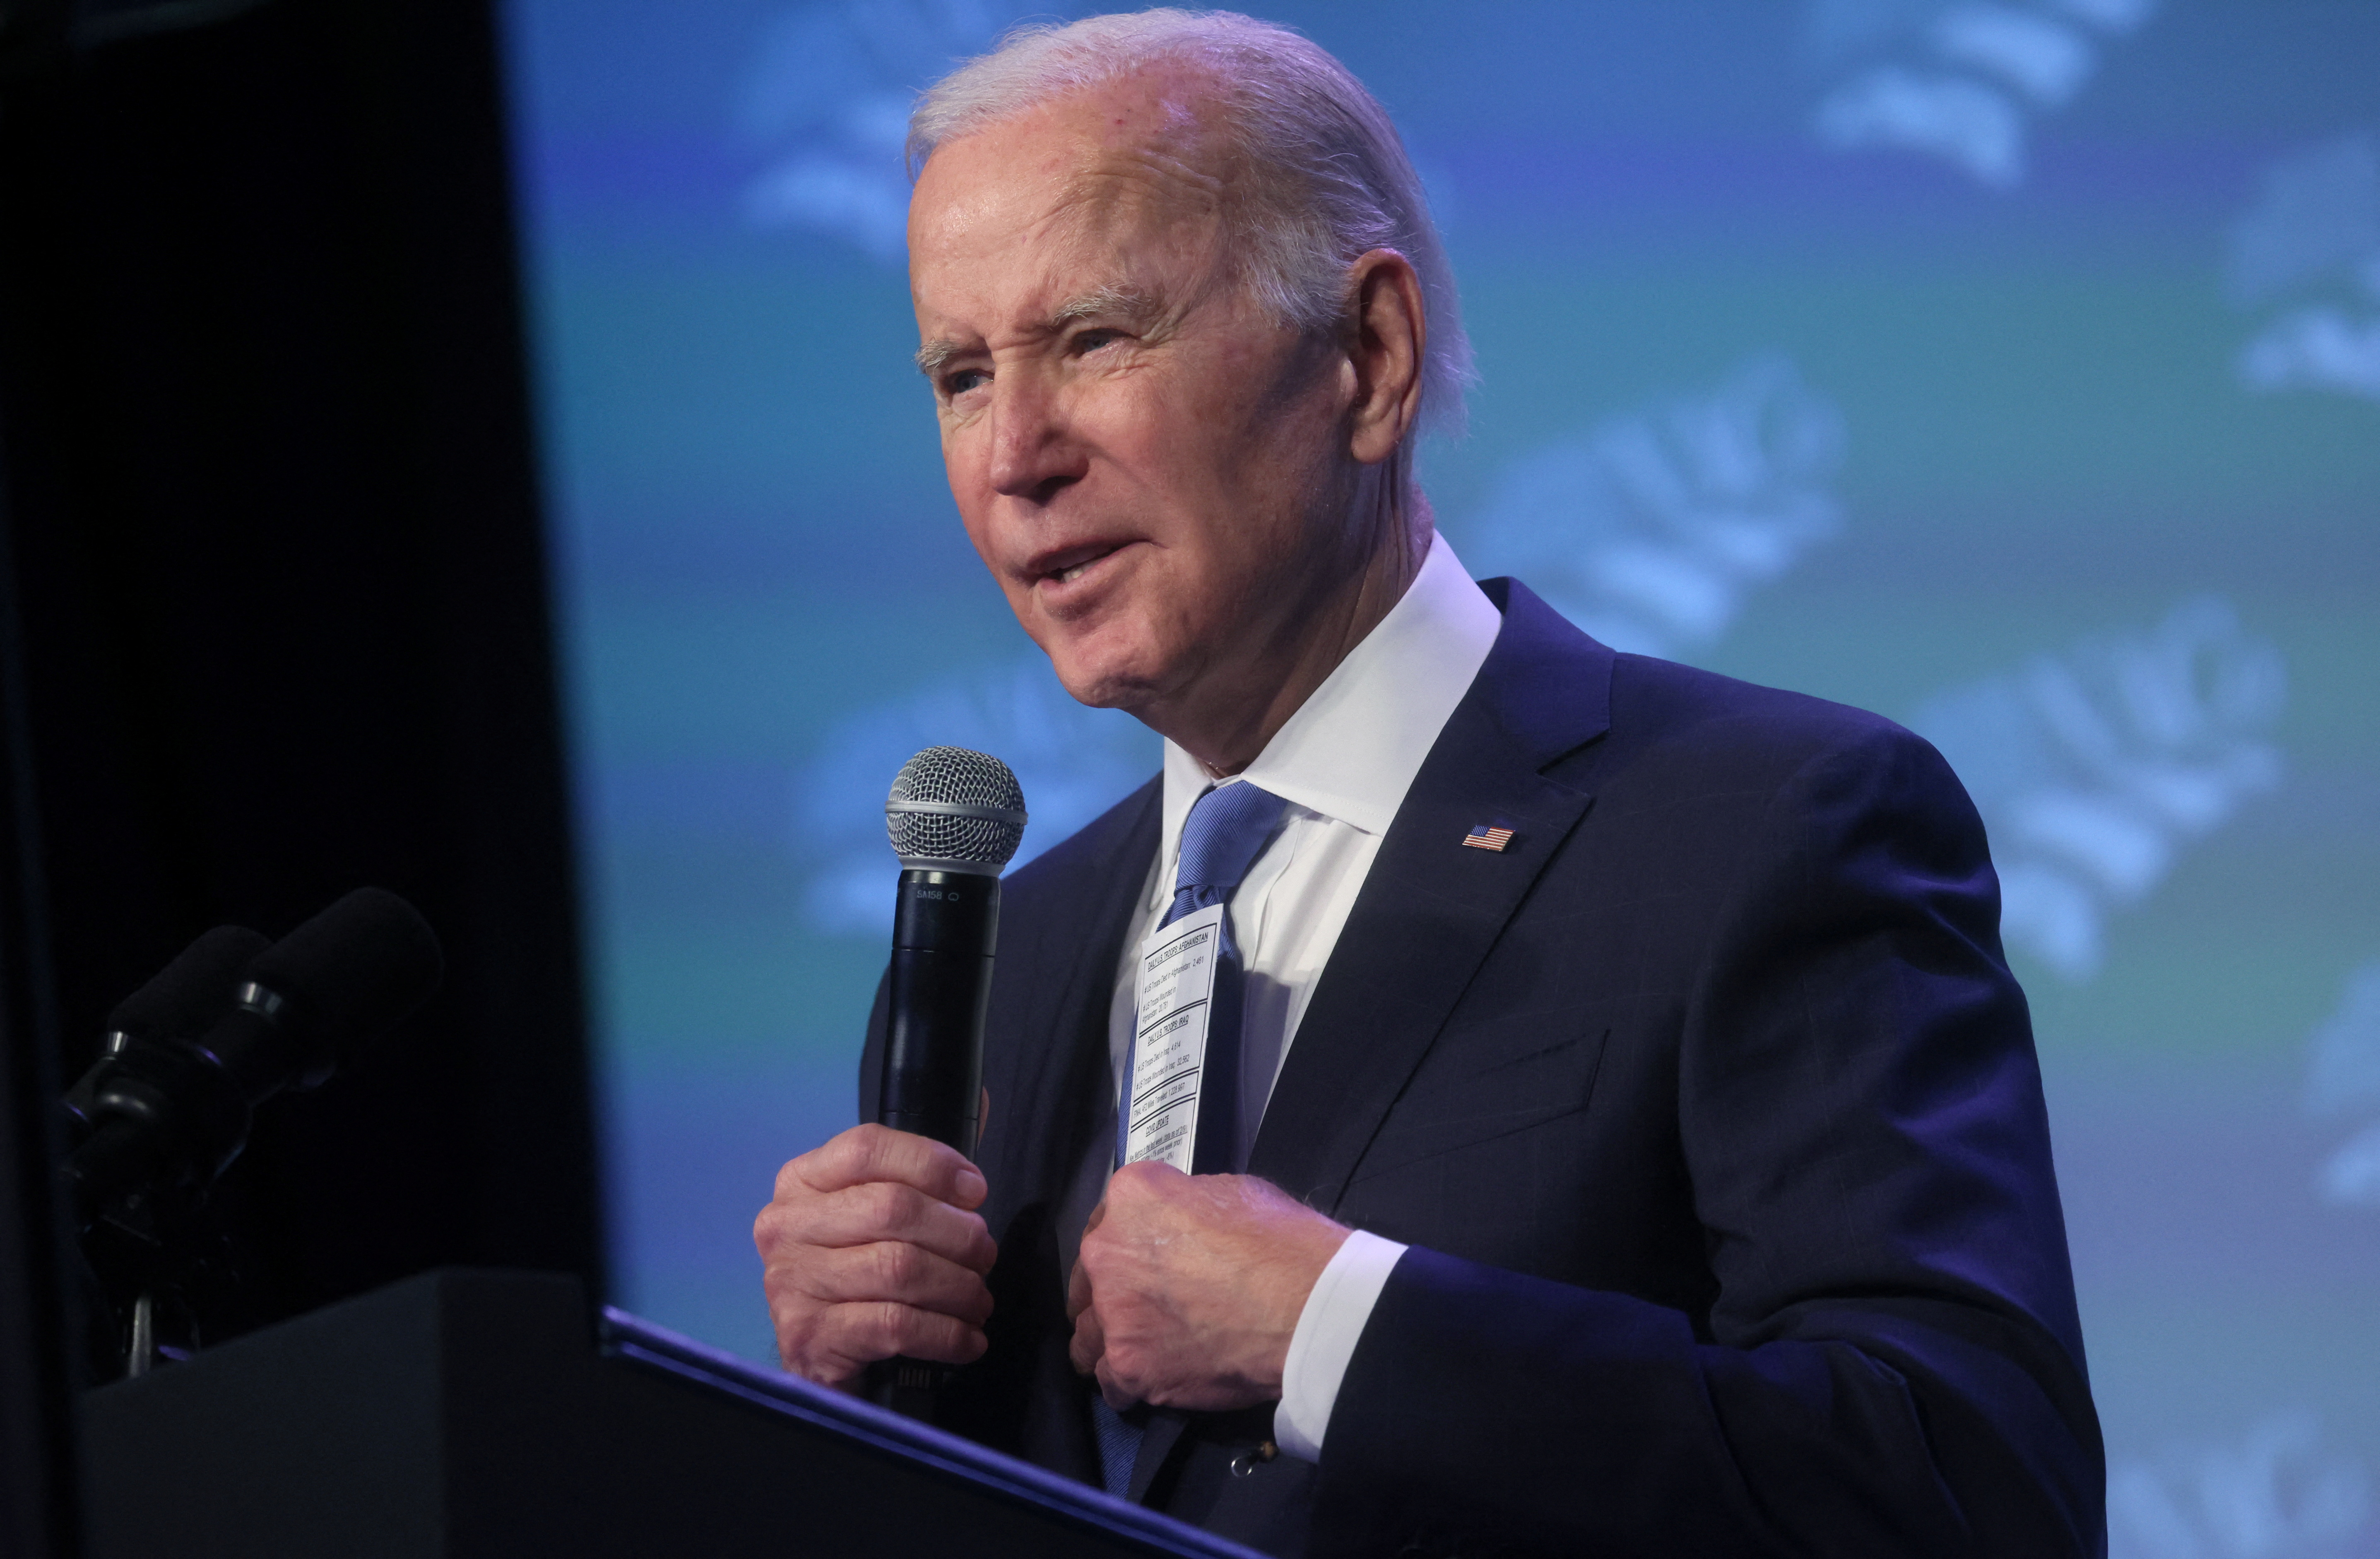 U.S. President Biden at the National Association of Counties (NACo) Legislative Conference